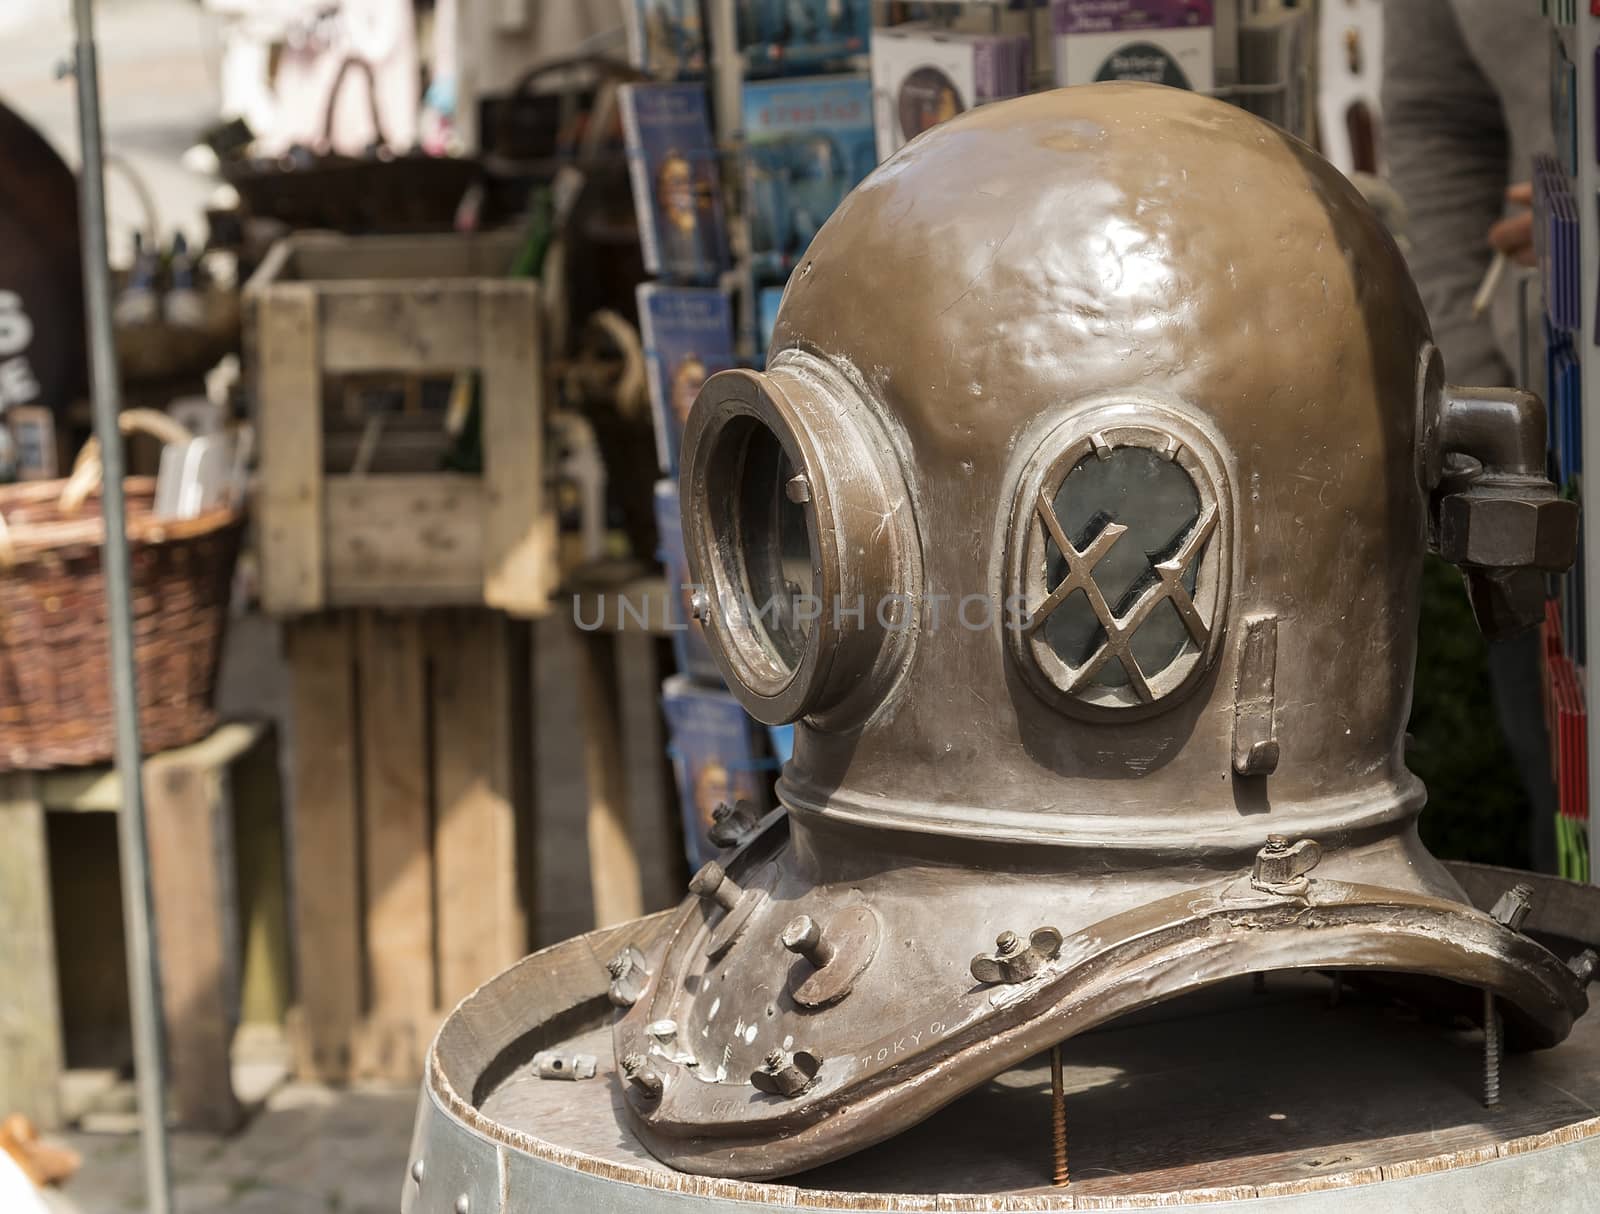 An old divers helmet outside a shop to attract customers